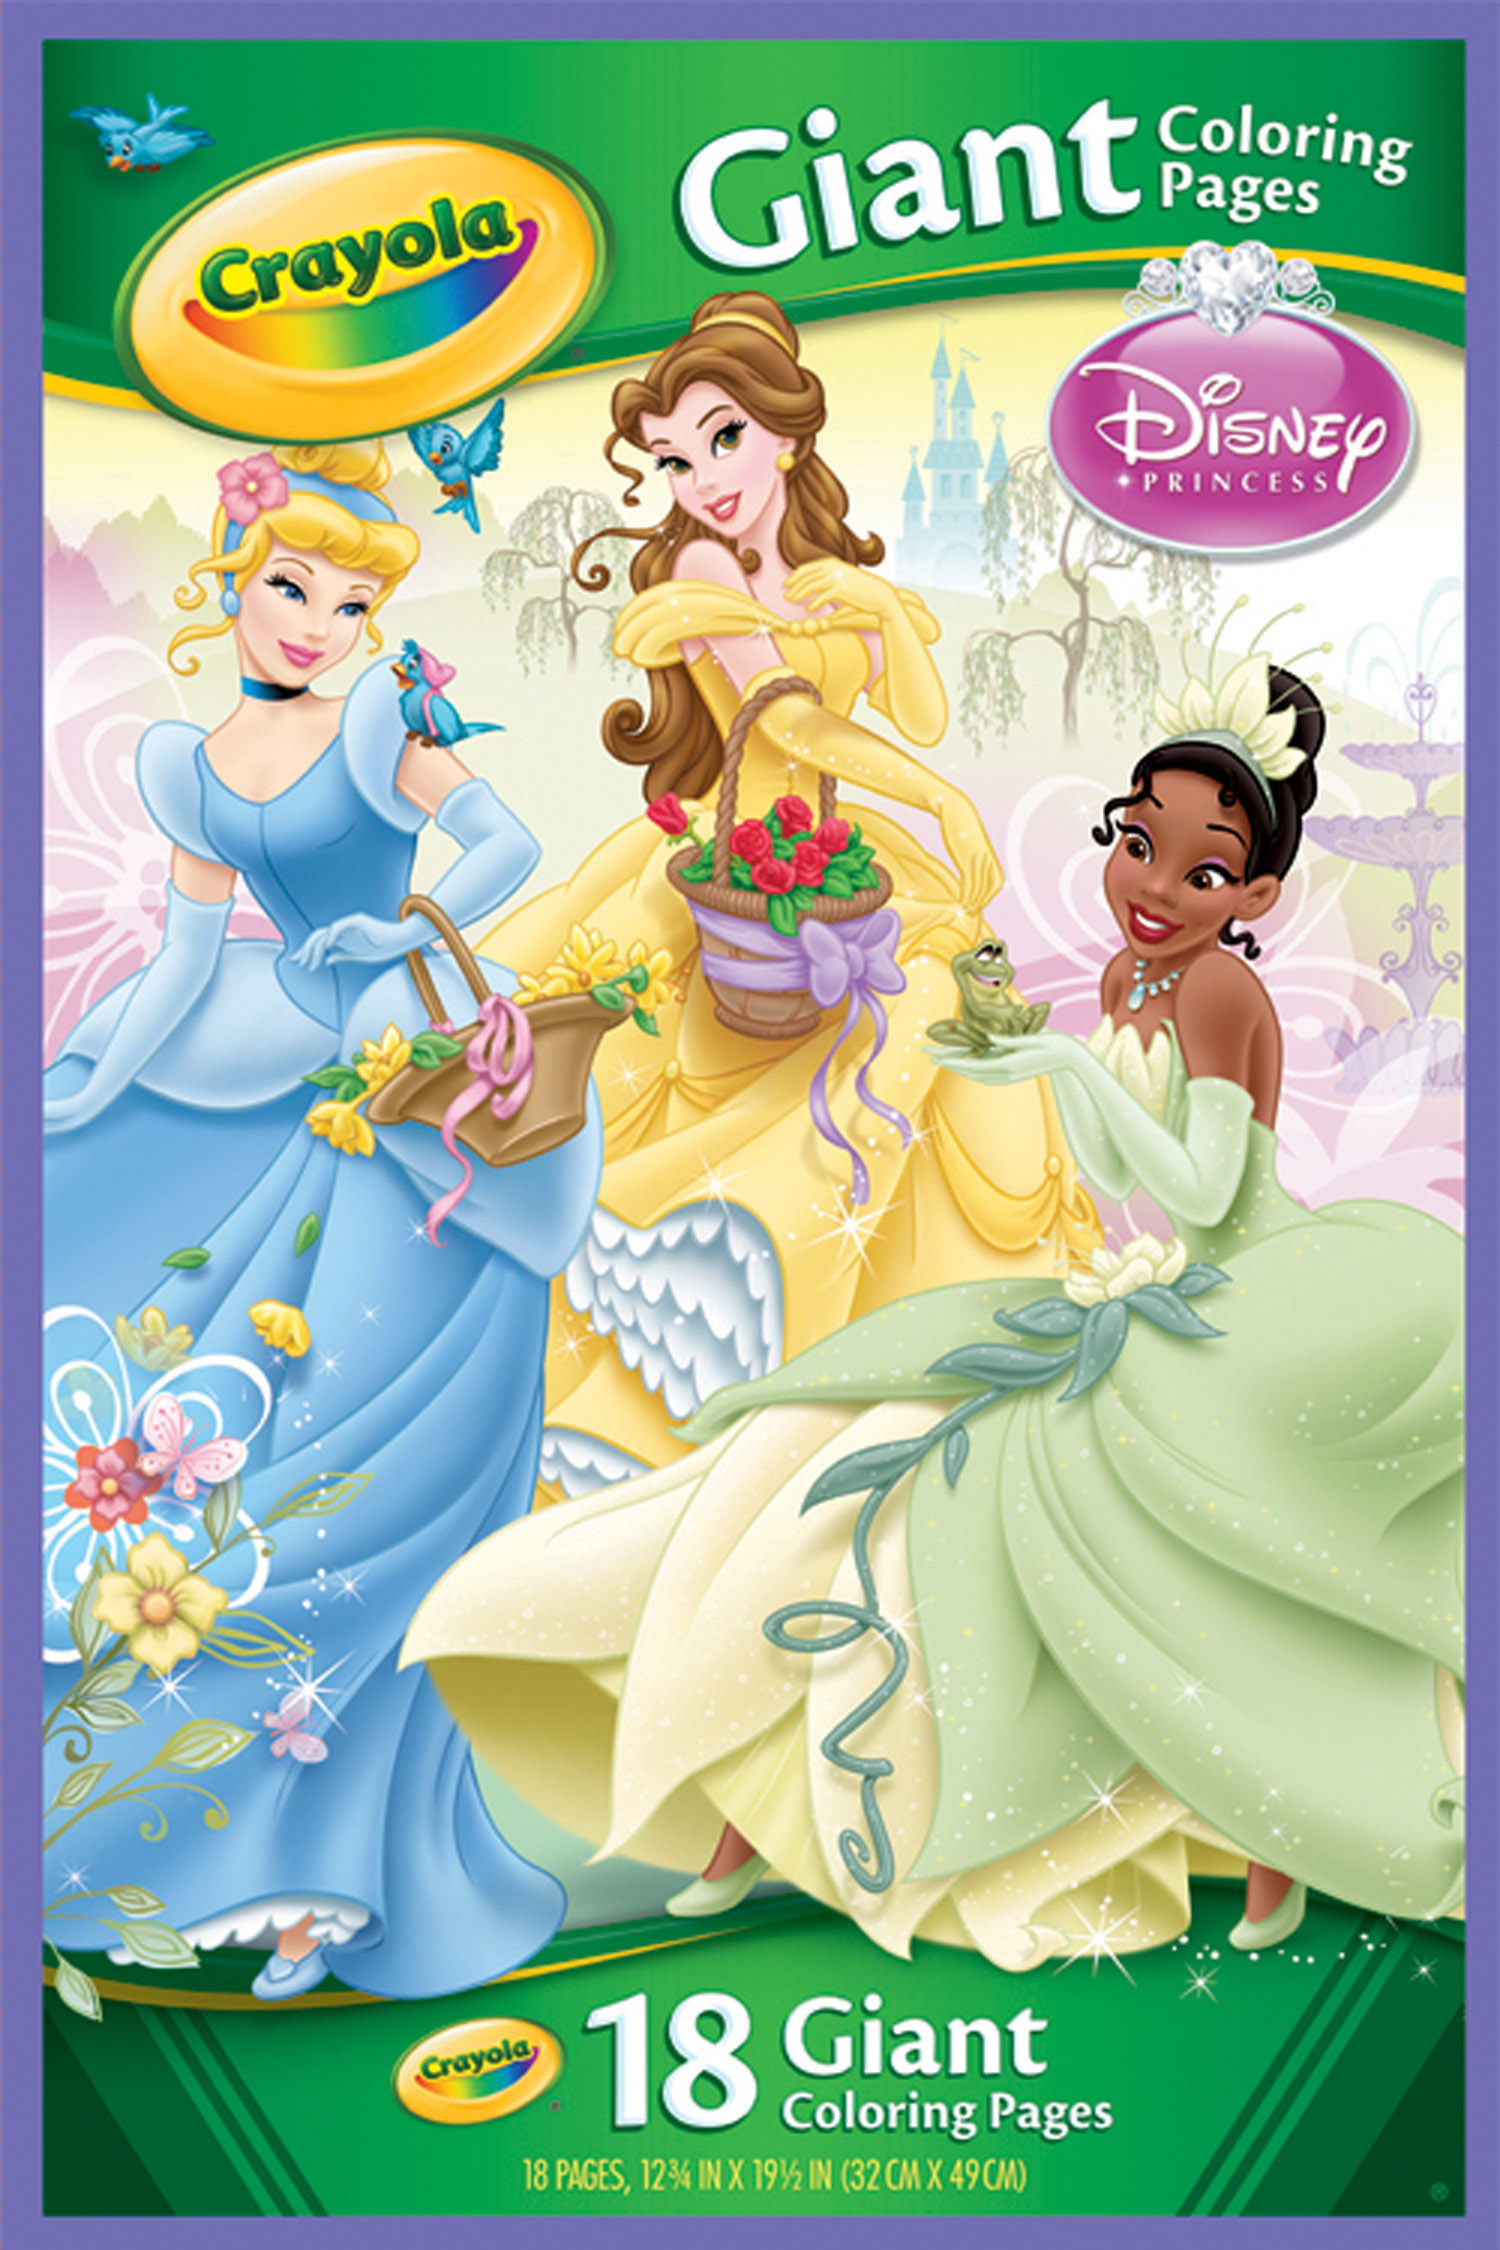 04-5169 - Crayola Giant Colouring Pages - Disney Princess